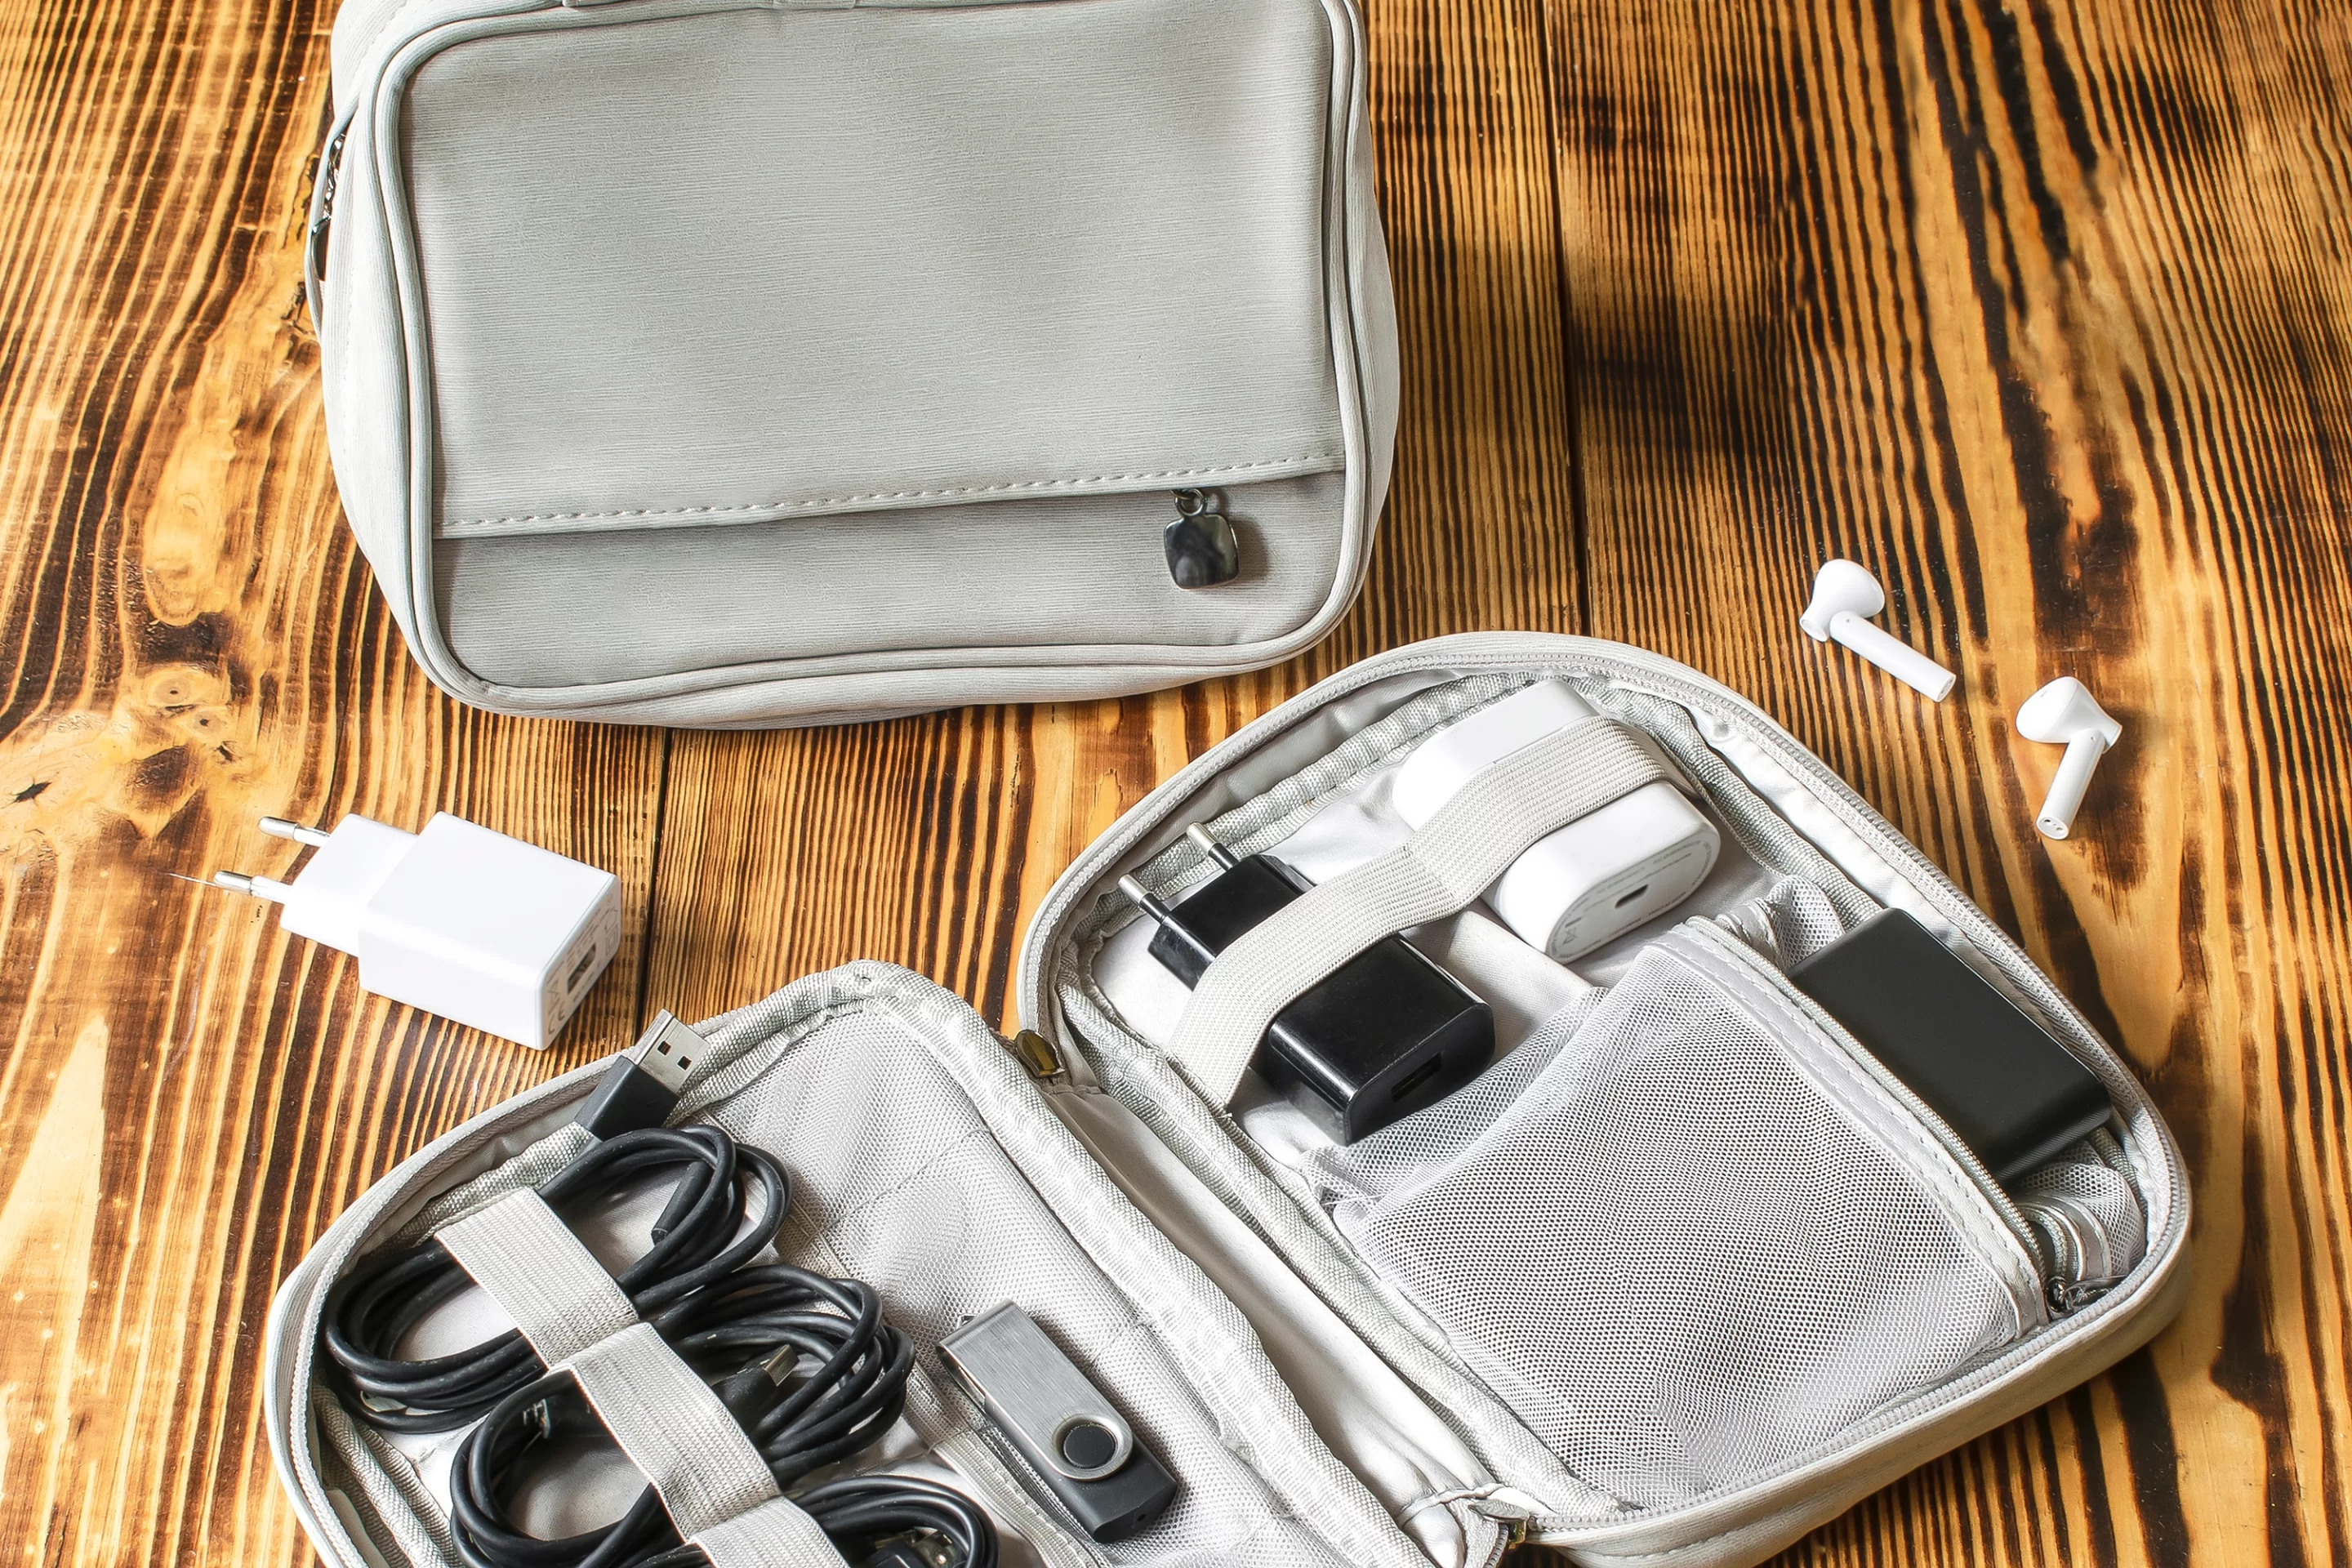 Stay connected and prepared with a portable charger, flashlight, and waterproof gear for your travels.